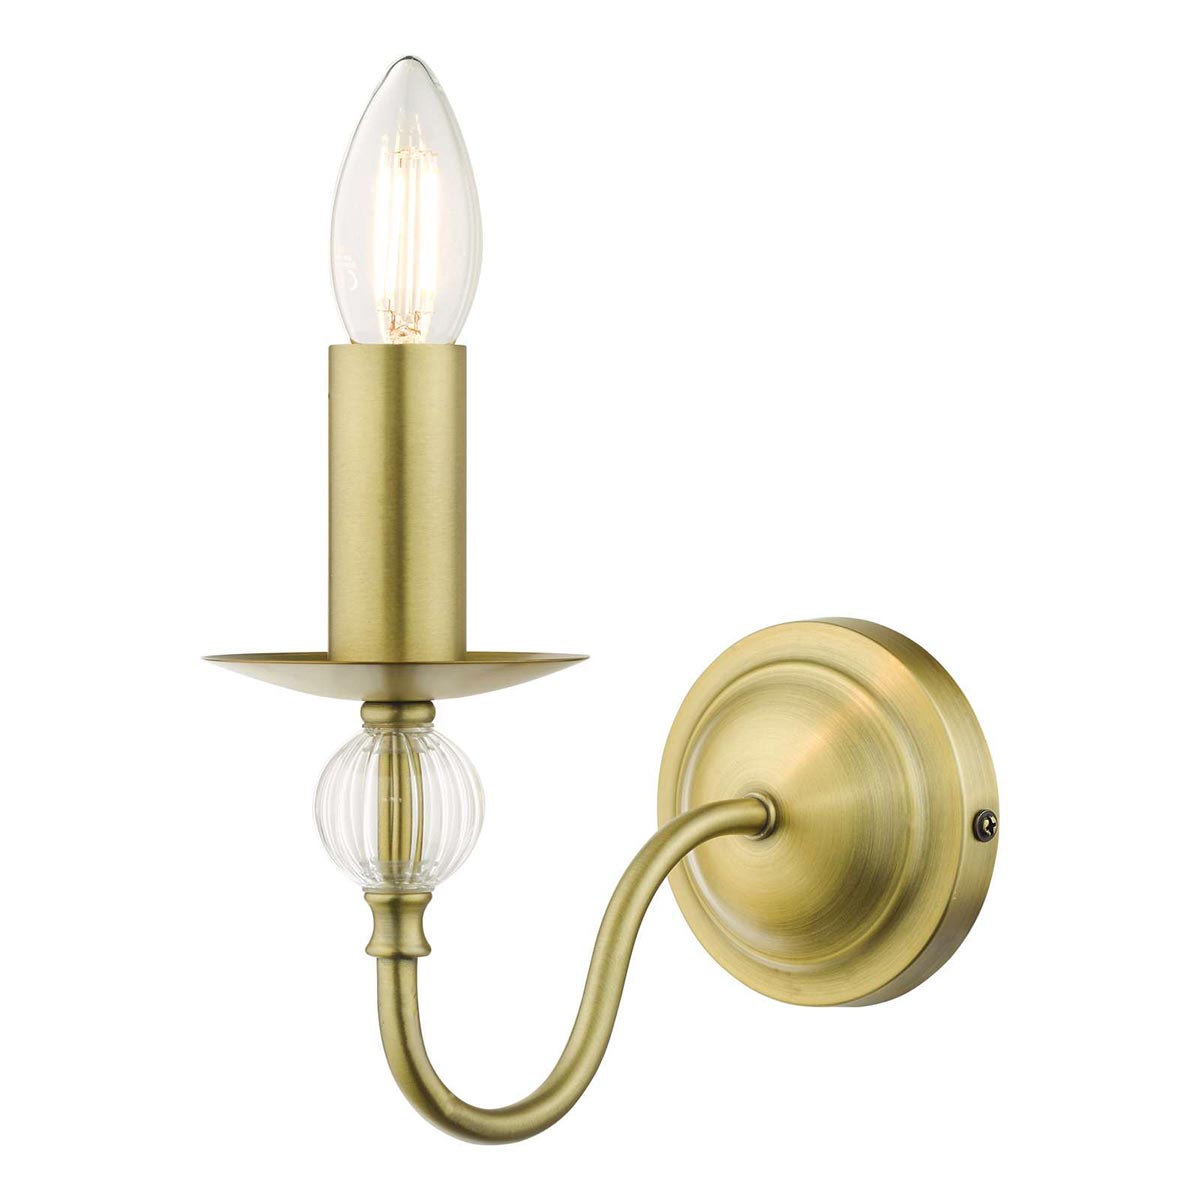 Dar Lyzette Classic Aged Brass Switched Single Wall Light Ribbed Glass